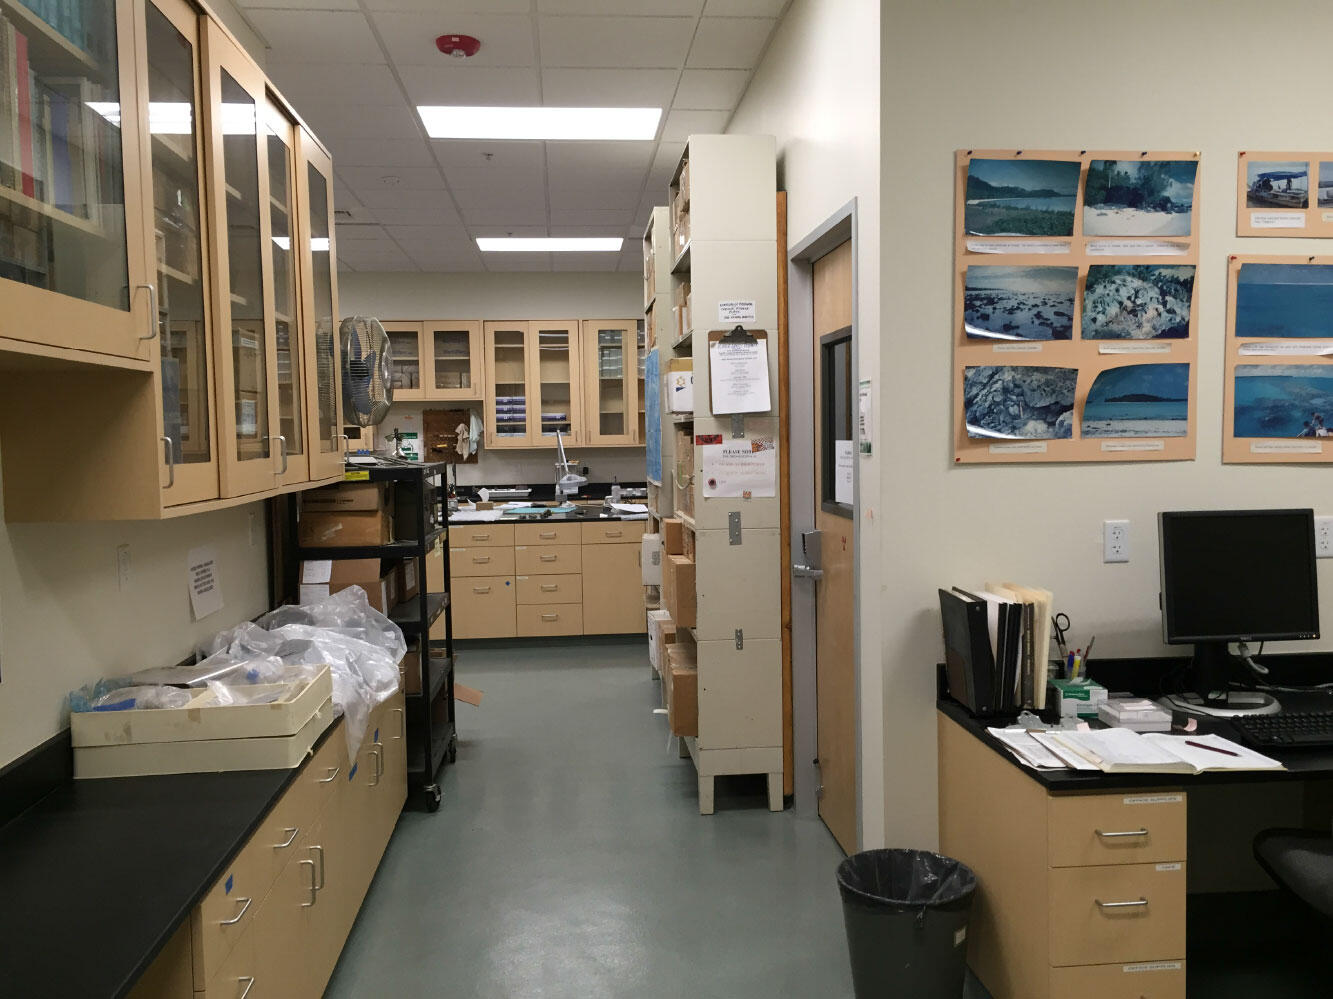 Photo of a laboratory with various equipment and tables to work on.